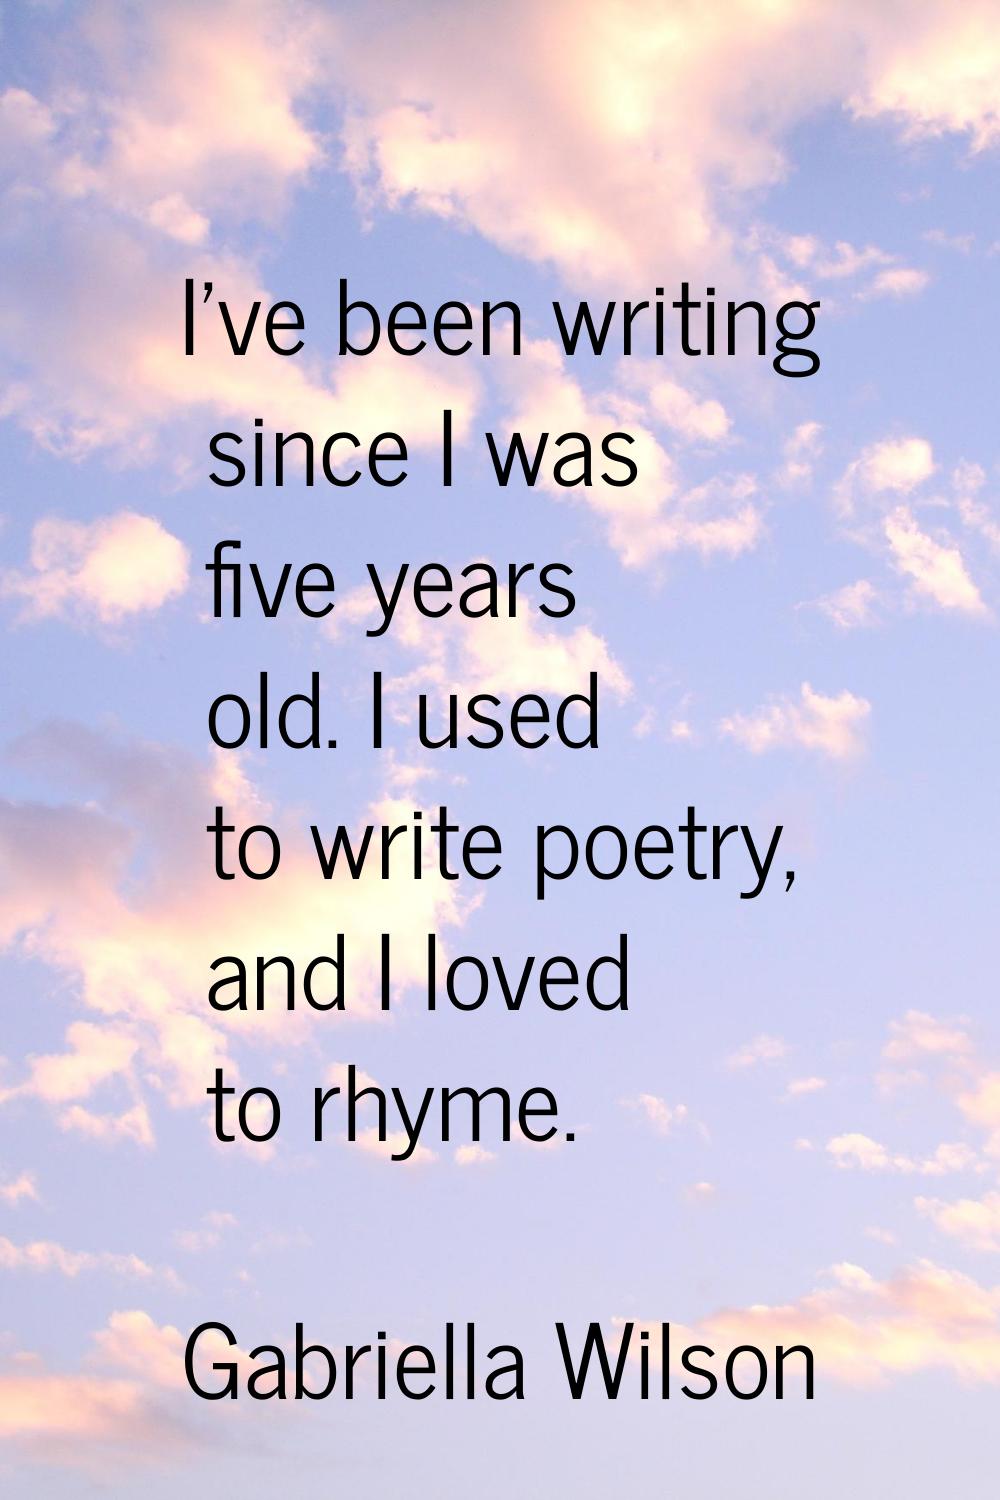 I've been writing since I was five years old. I used to write poetry, and I loved to rhyme.